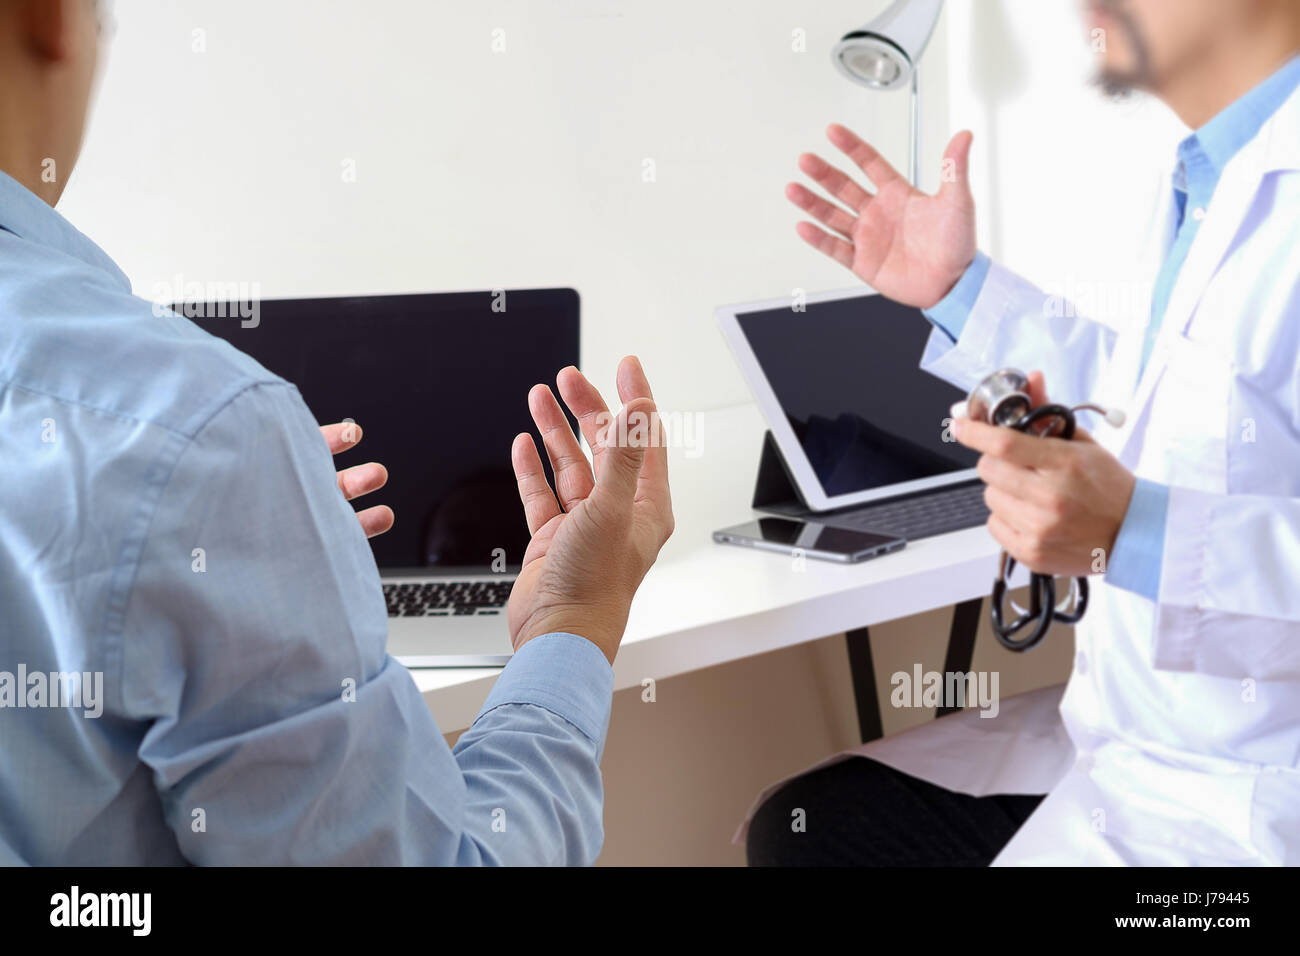 Medical doctor in white uniform gown coat consulting businessman patient having exam as Hospital professionalism concept Stock Photo